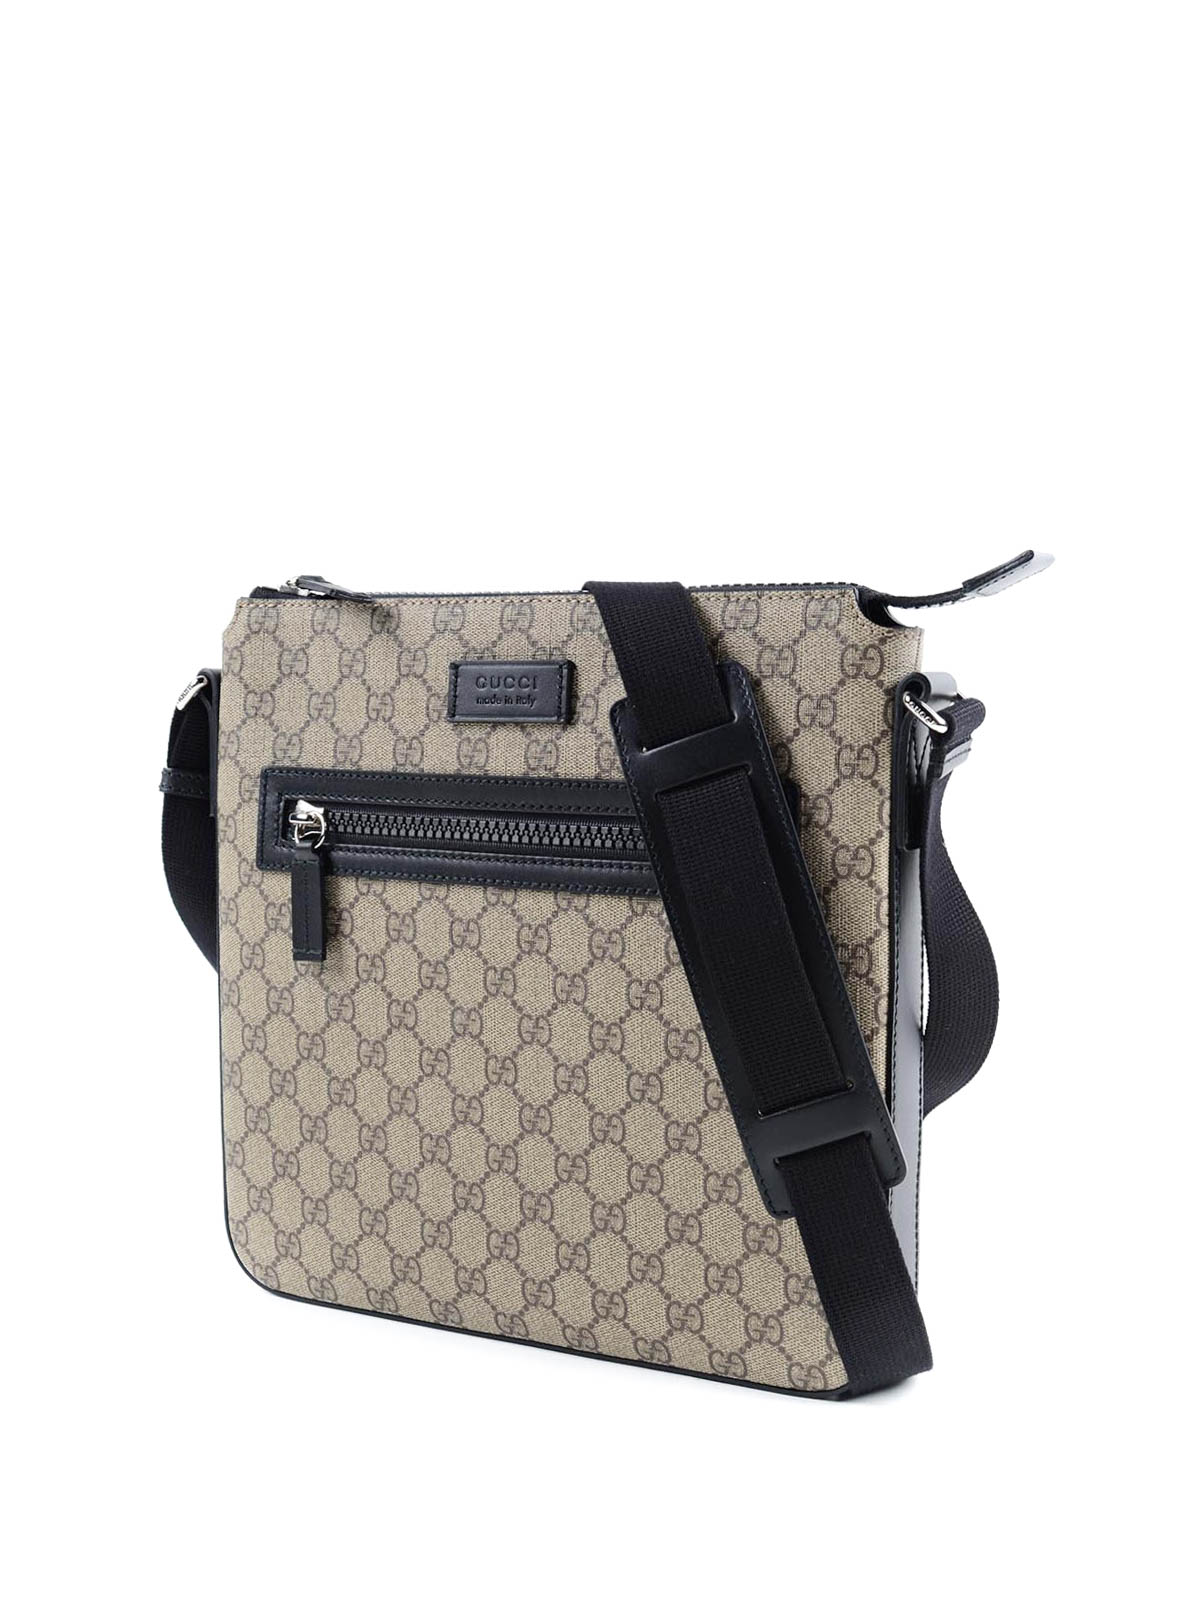 GG Supreme crossbody by Gucci - cross body bags | Shop online at 0